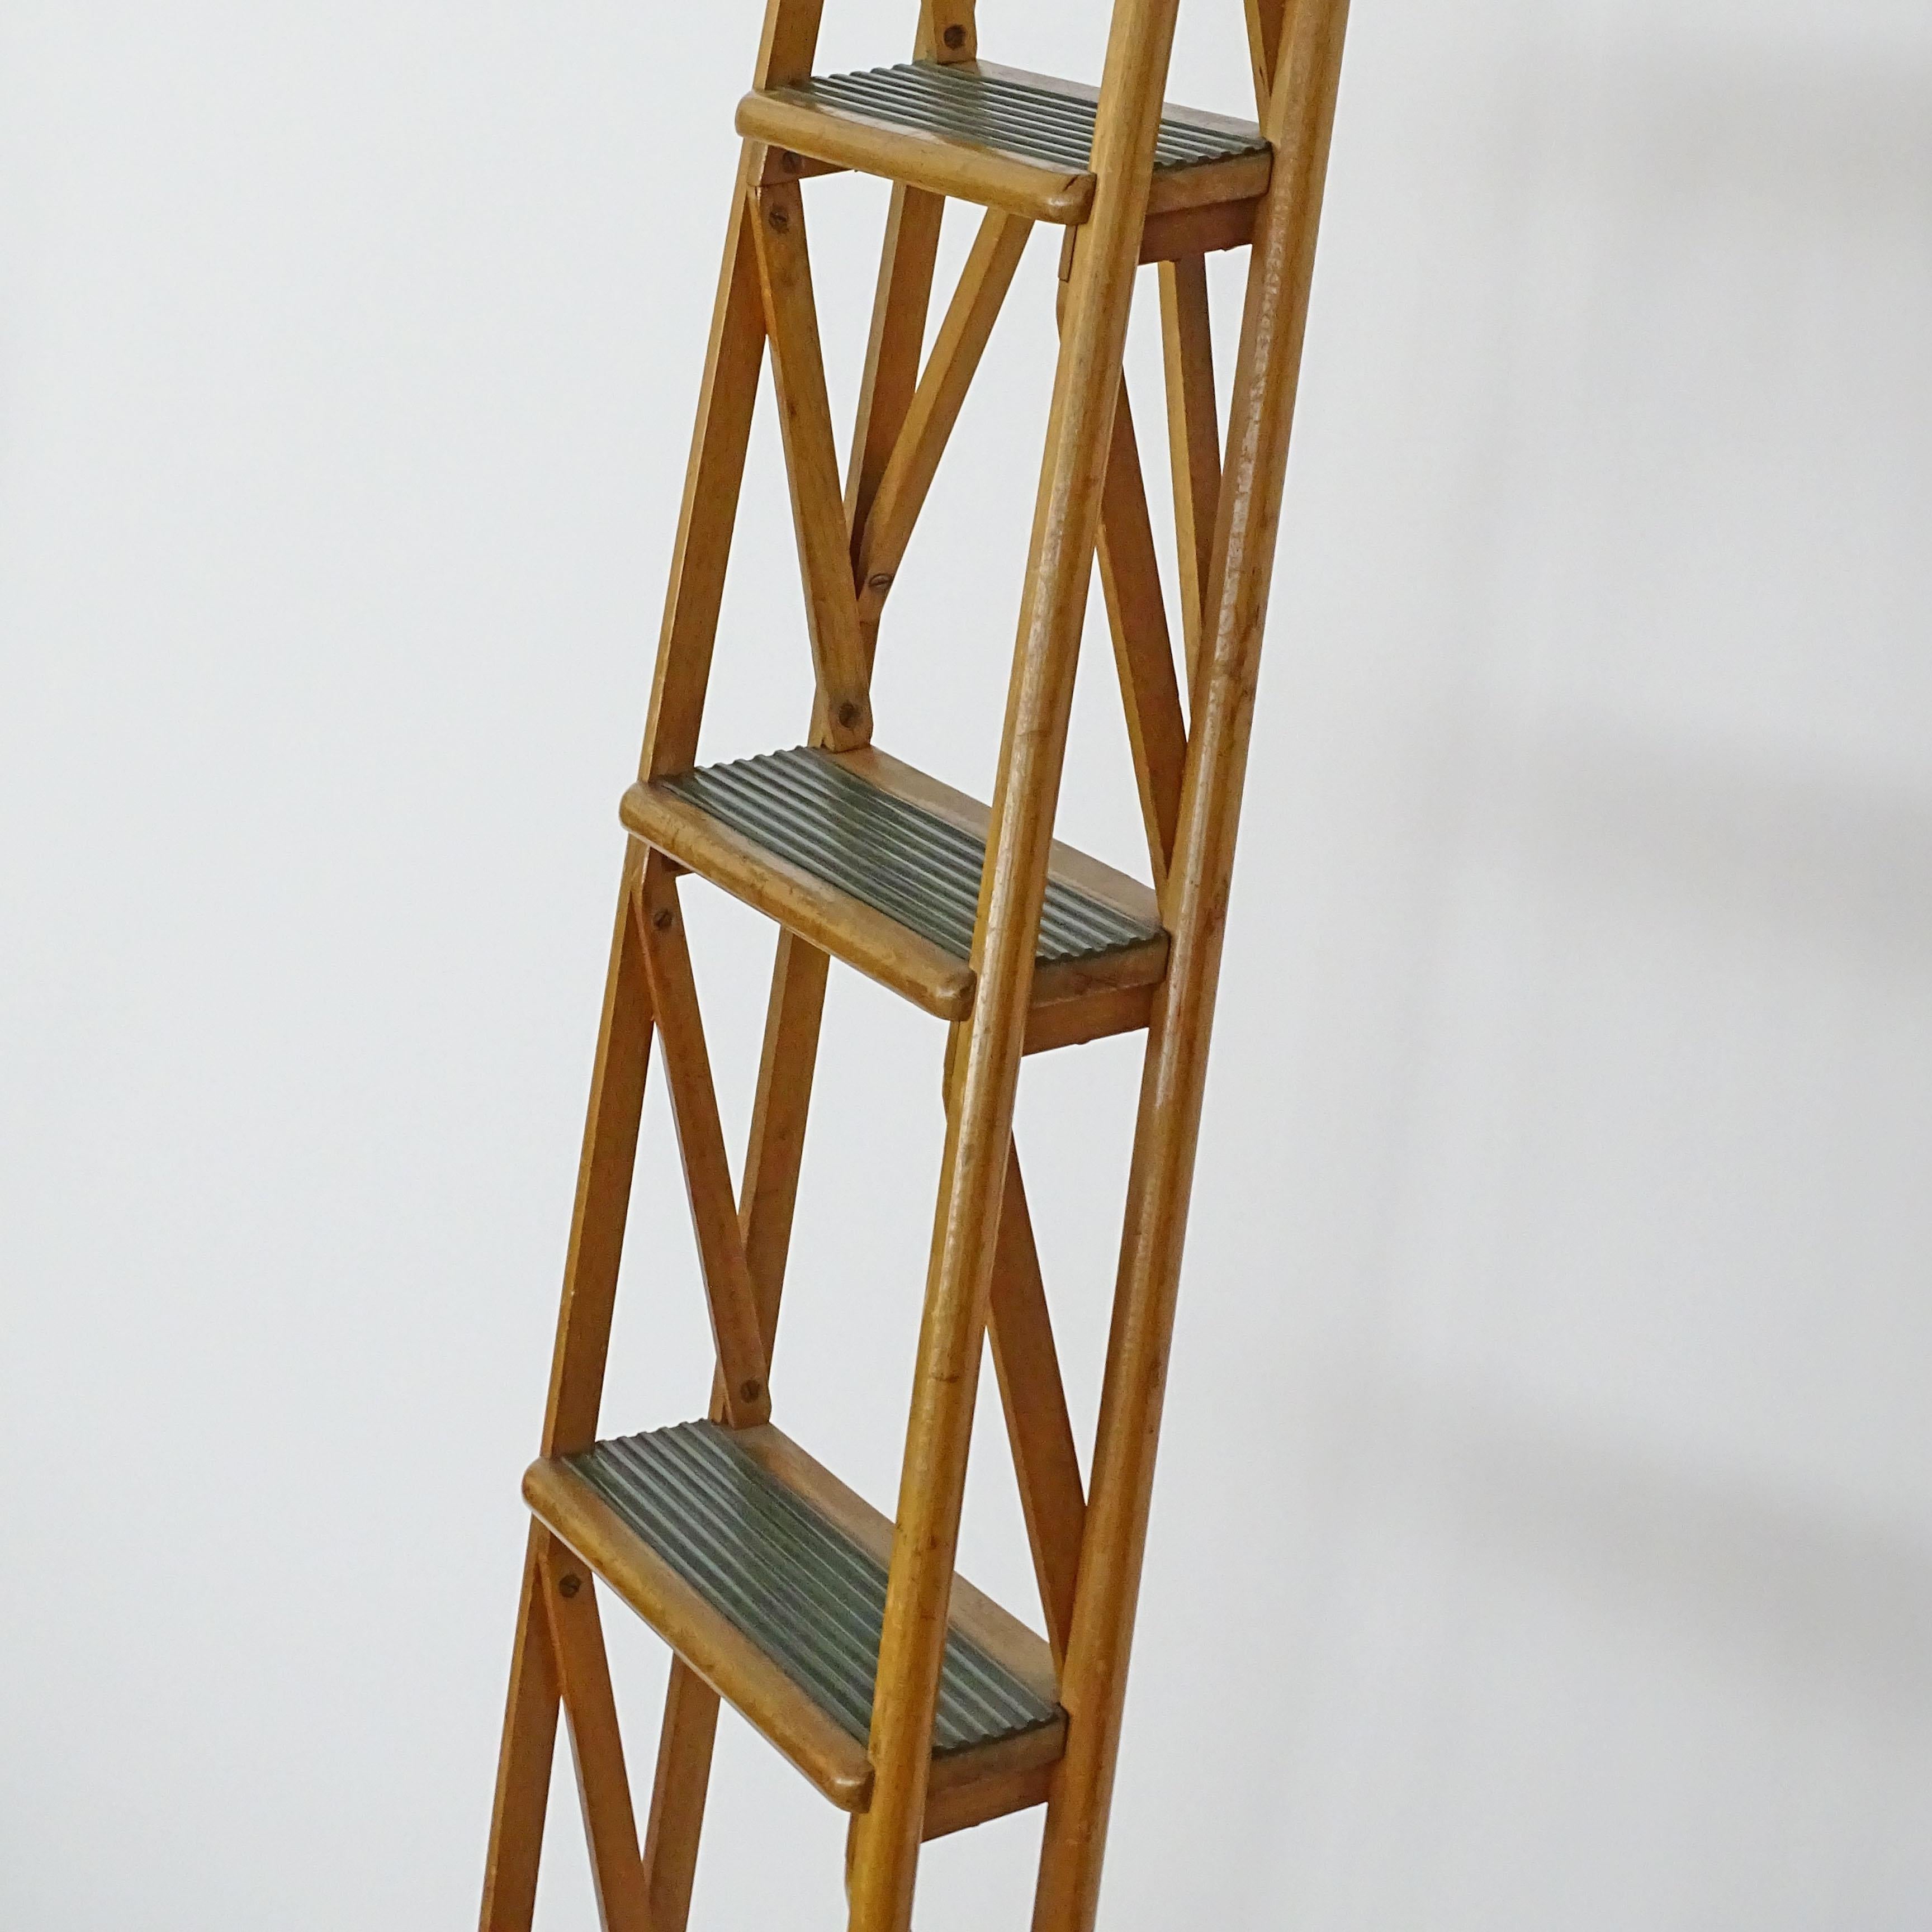 Italian Architectural Library Ladder Attributed to Franco Albini, 1950s 3